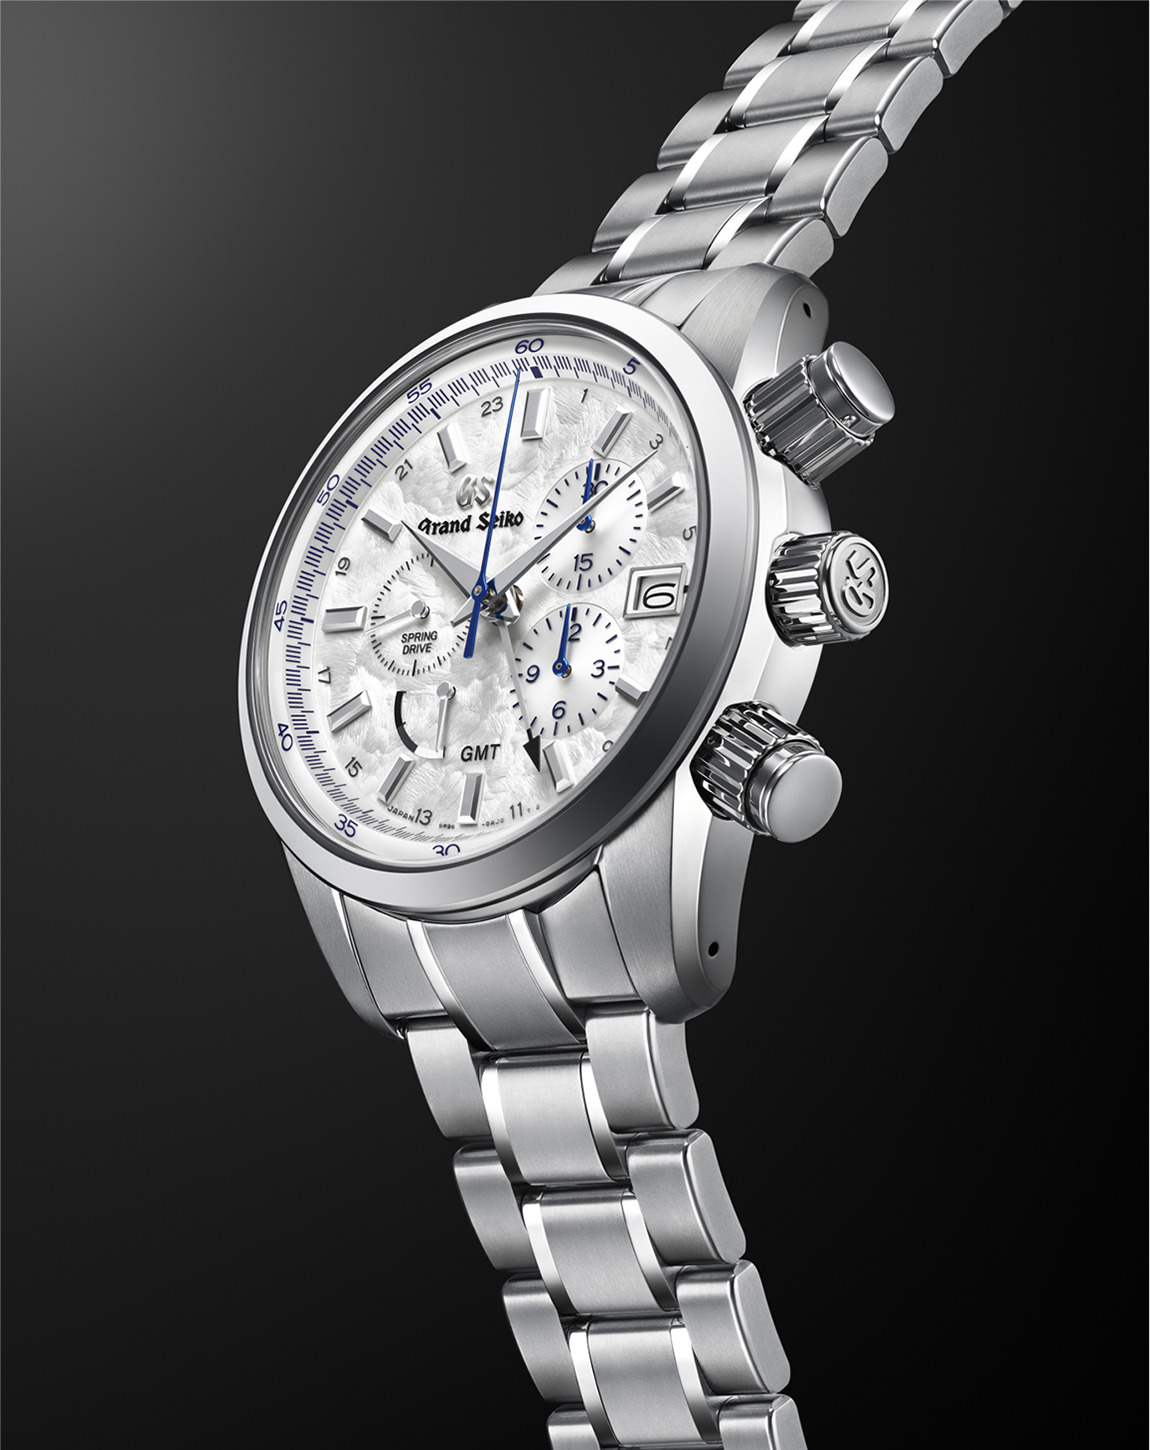 Sport Collection Grand Seiko Chronograph 15th Anniversary Limited Edition